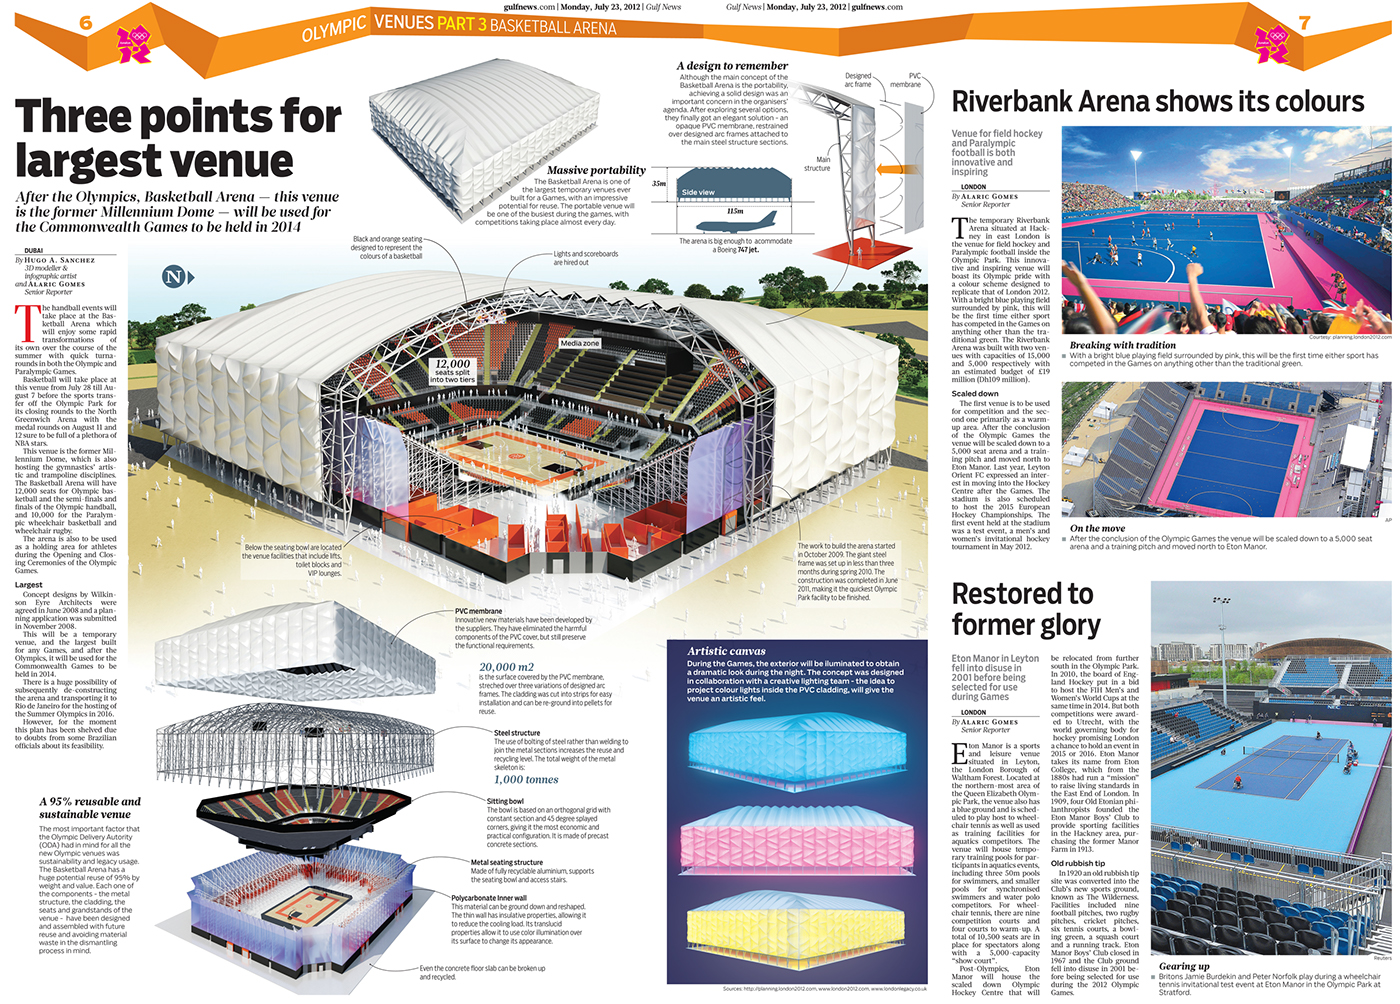 London 2012 BASKETBALL ARENA LONDON 3D OLYMPIC VENUES OLYMPIC GAMES INFOGRAPHIC